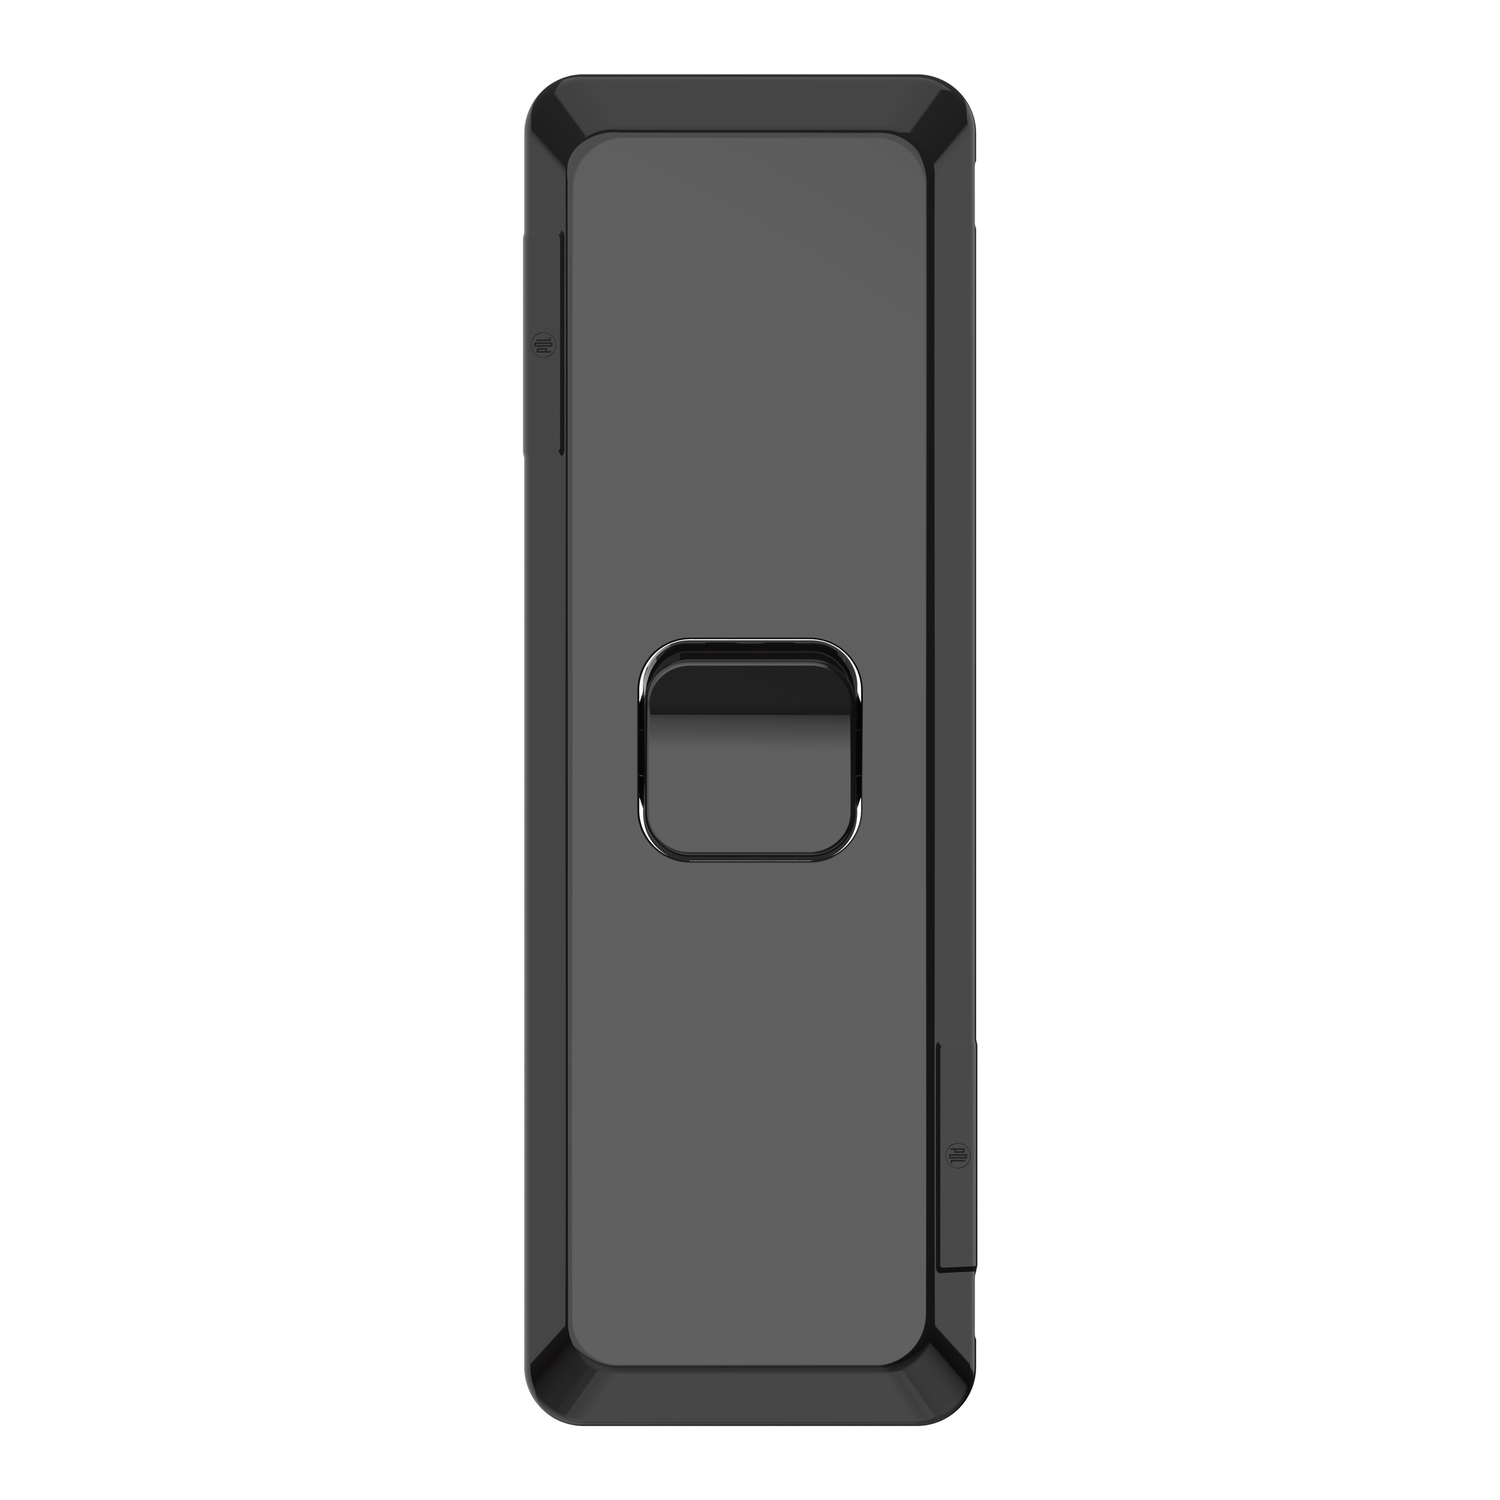 PDL Pro Series - Switch Architrave 1/2-Way 20A 16AX 1-Gang - Black